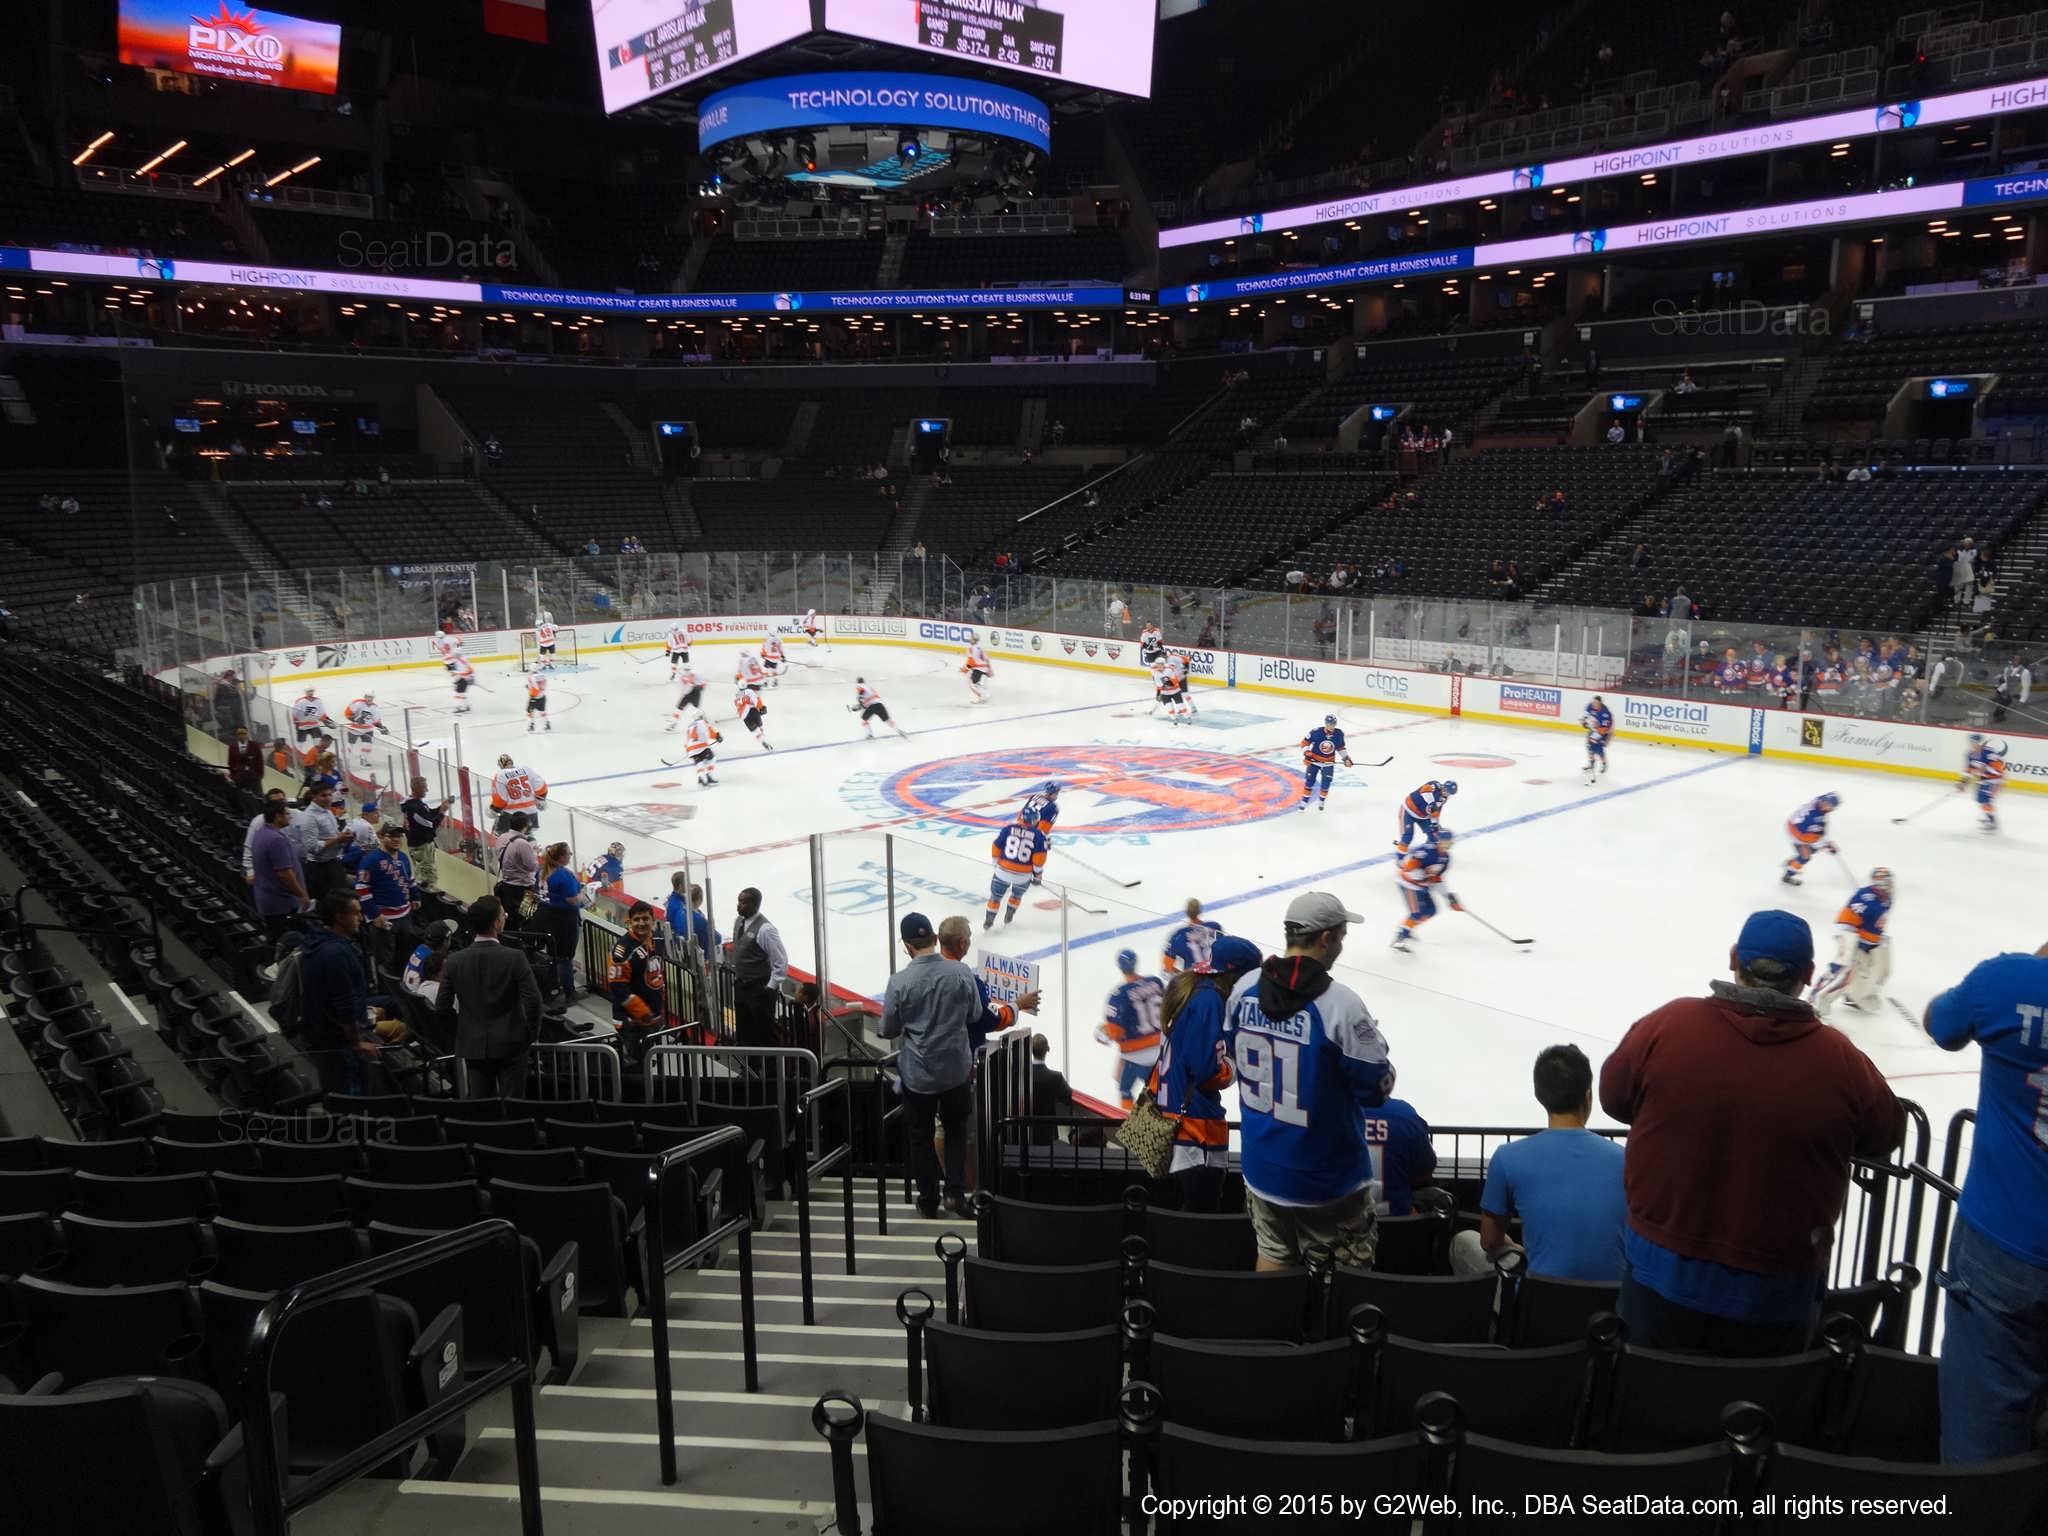 Seat view from section 4 at the Barclays Center, home of the New York Islanders